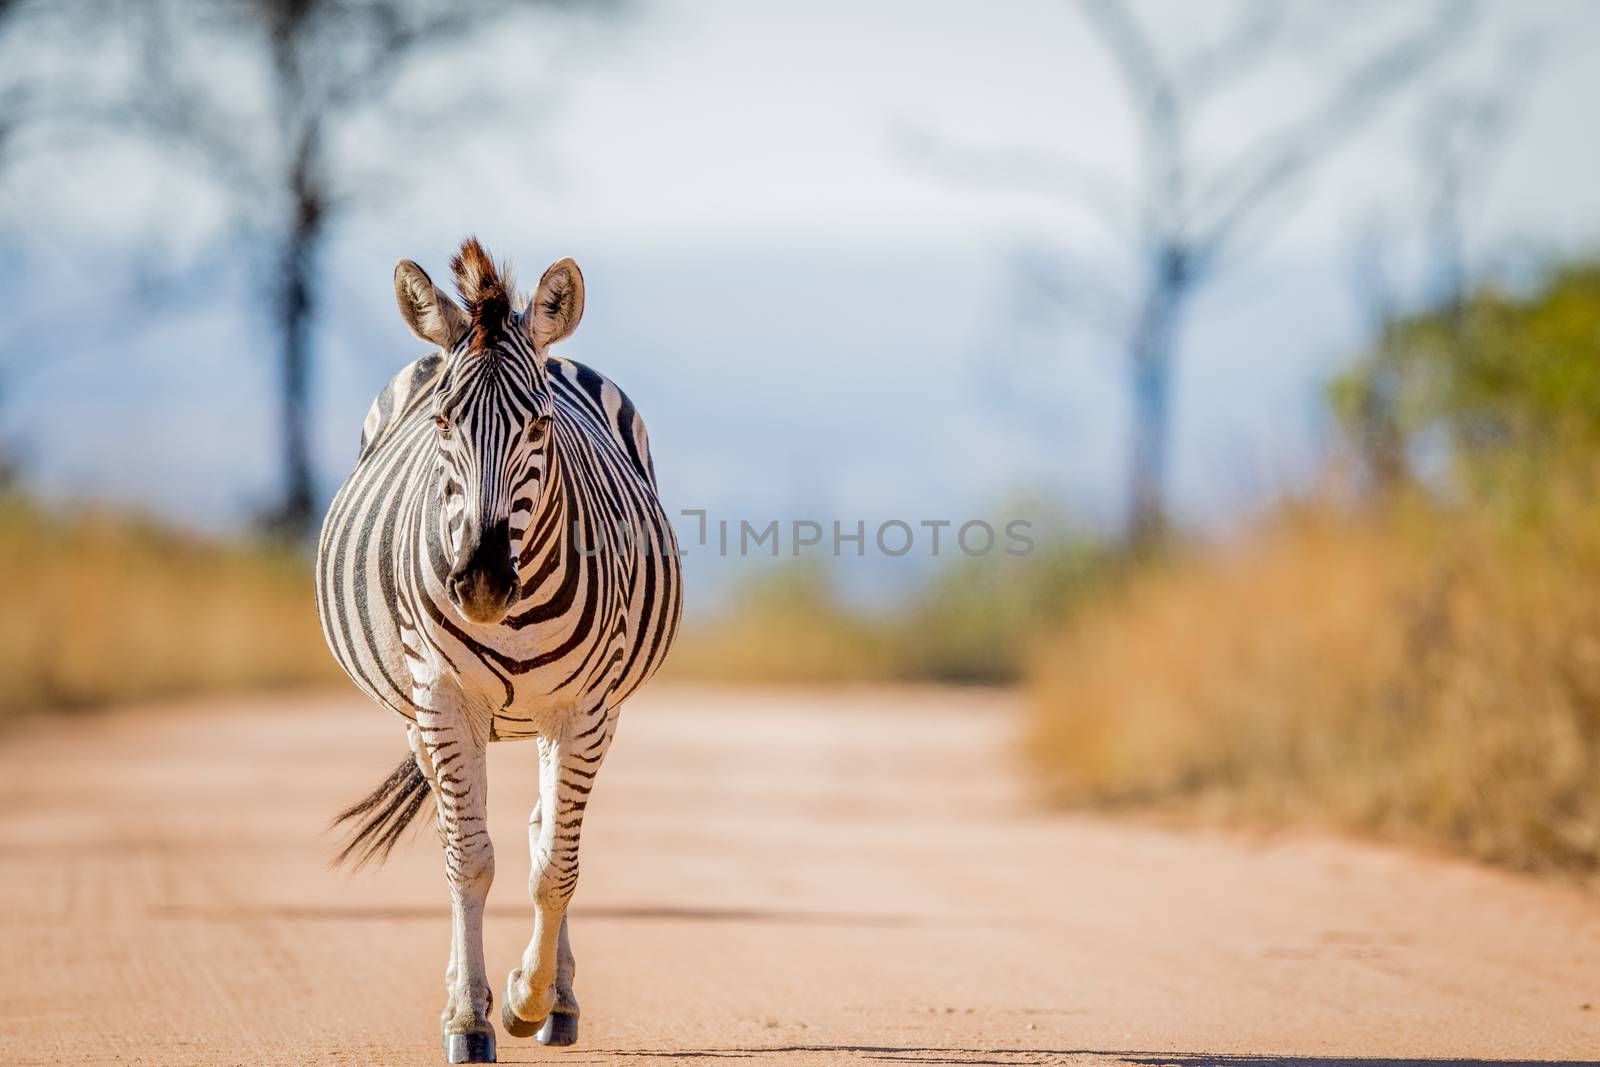 Zebra walking on the road in the Kruger. by Simoneemanphotography